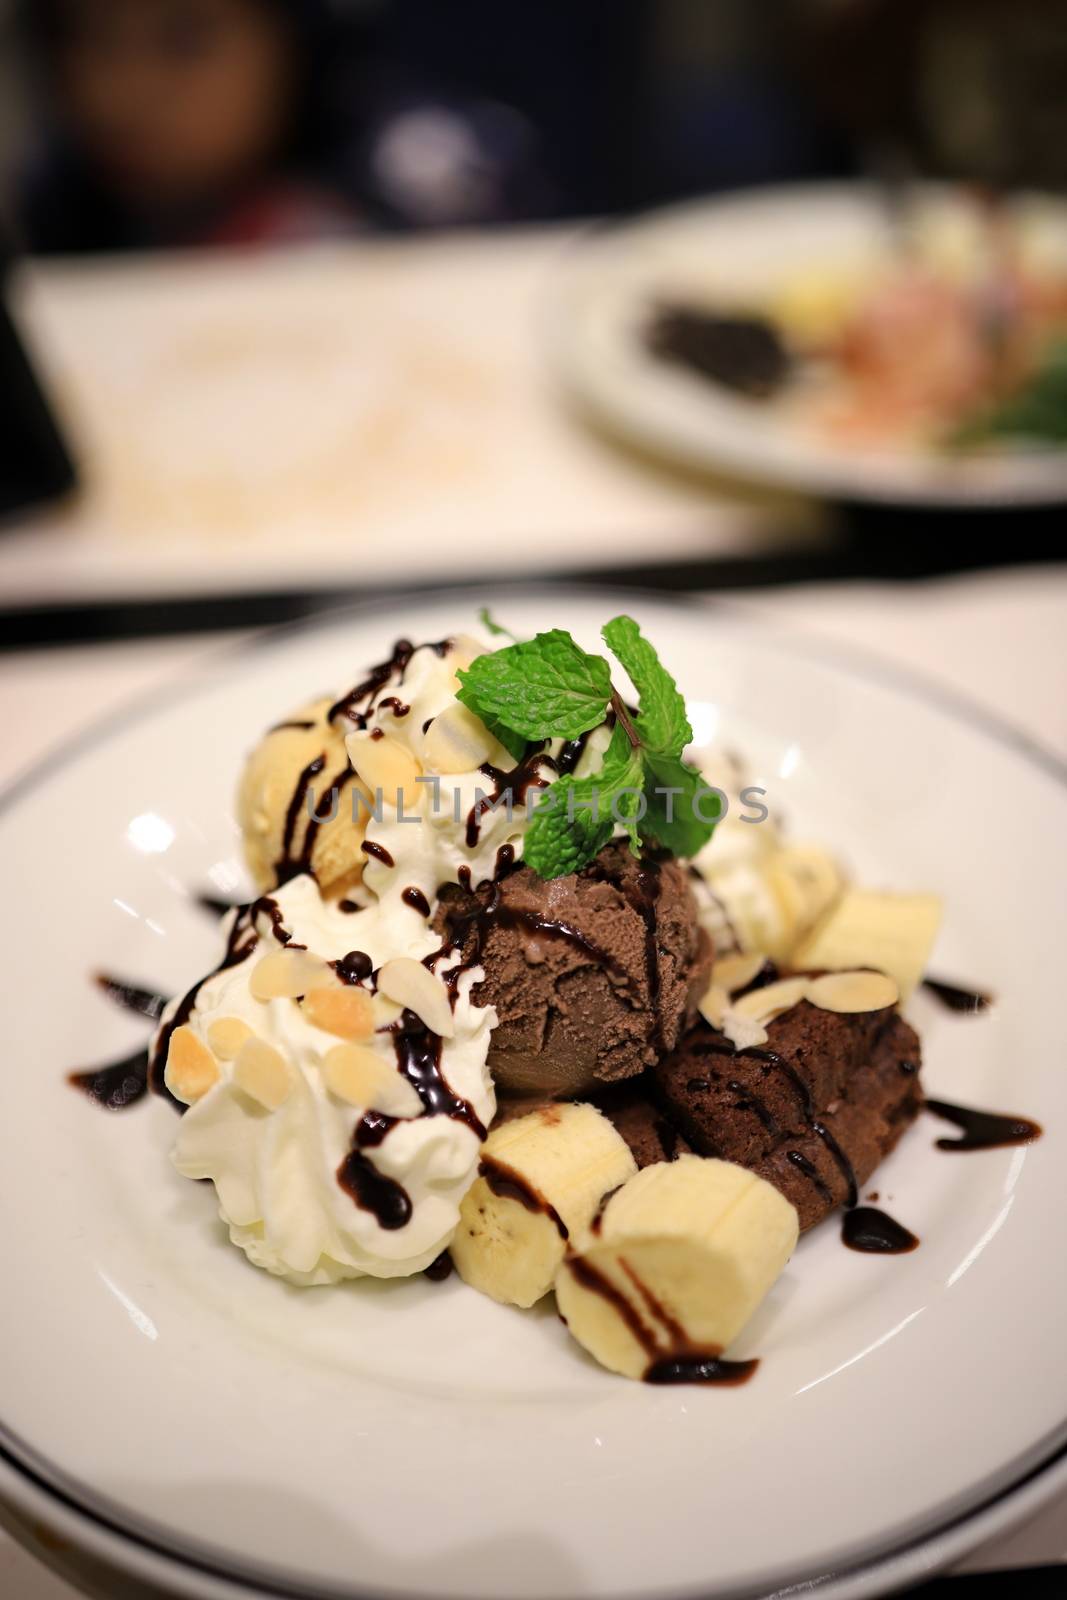 Chocolate ice cream and sliced bananas Garnish with mint leaves. With white mousse and sliced almonds in a white plate Topped with chocolate sauce to look delicious. Selective focus. by joker3753